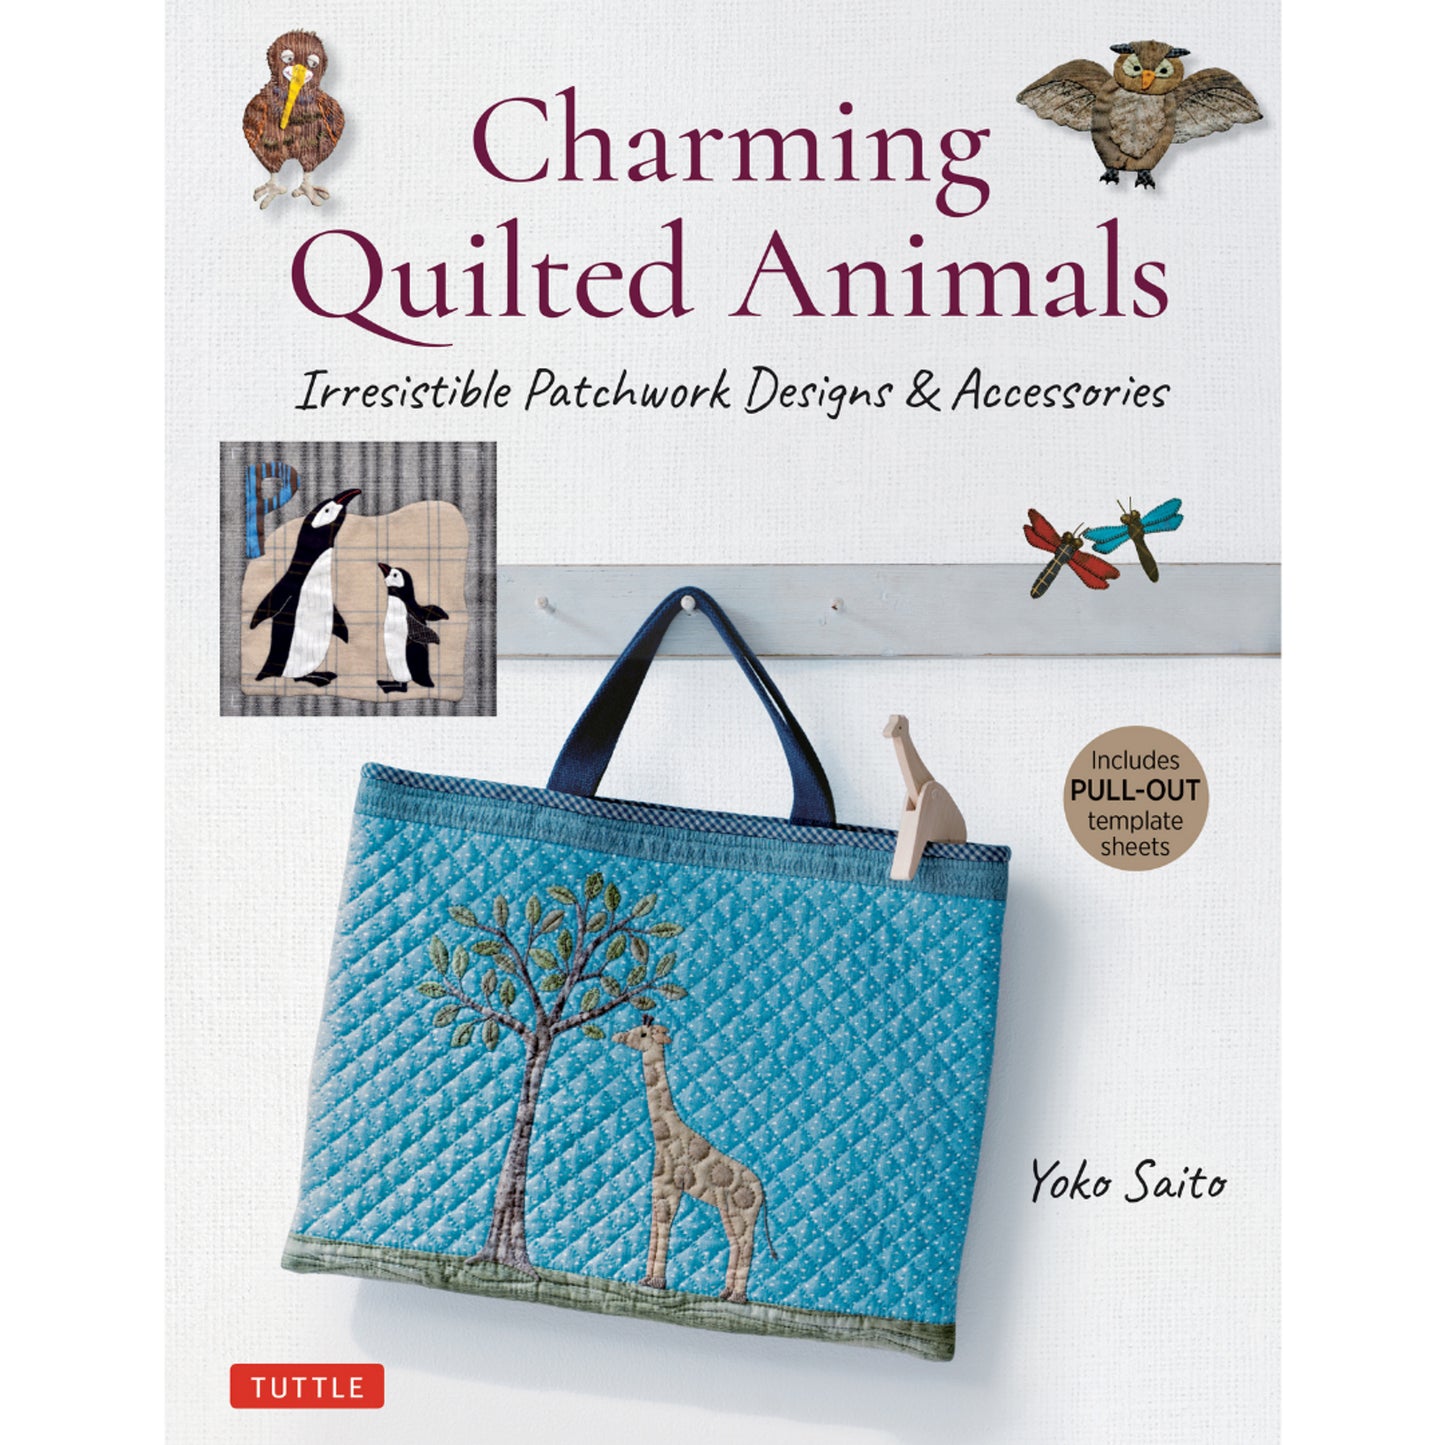 Charming Quilted Animals: Irresistible Patchwork Designs & Accessories